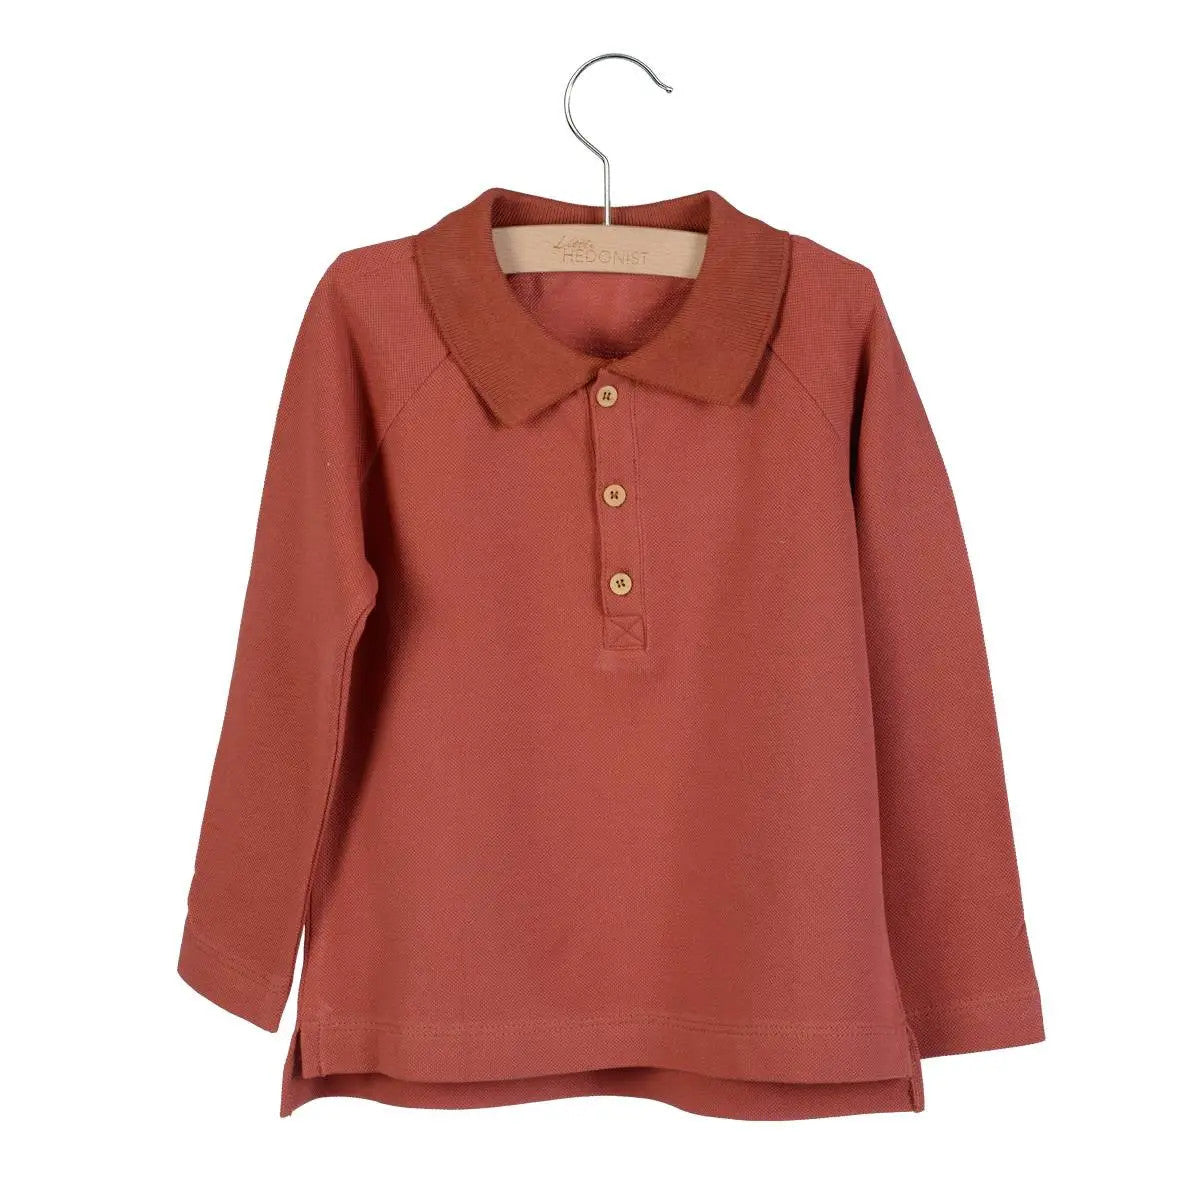 Little Hedonist organic rust longsleeve polo shirt with collar and buttons on the front.